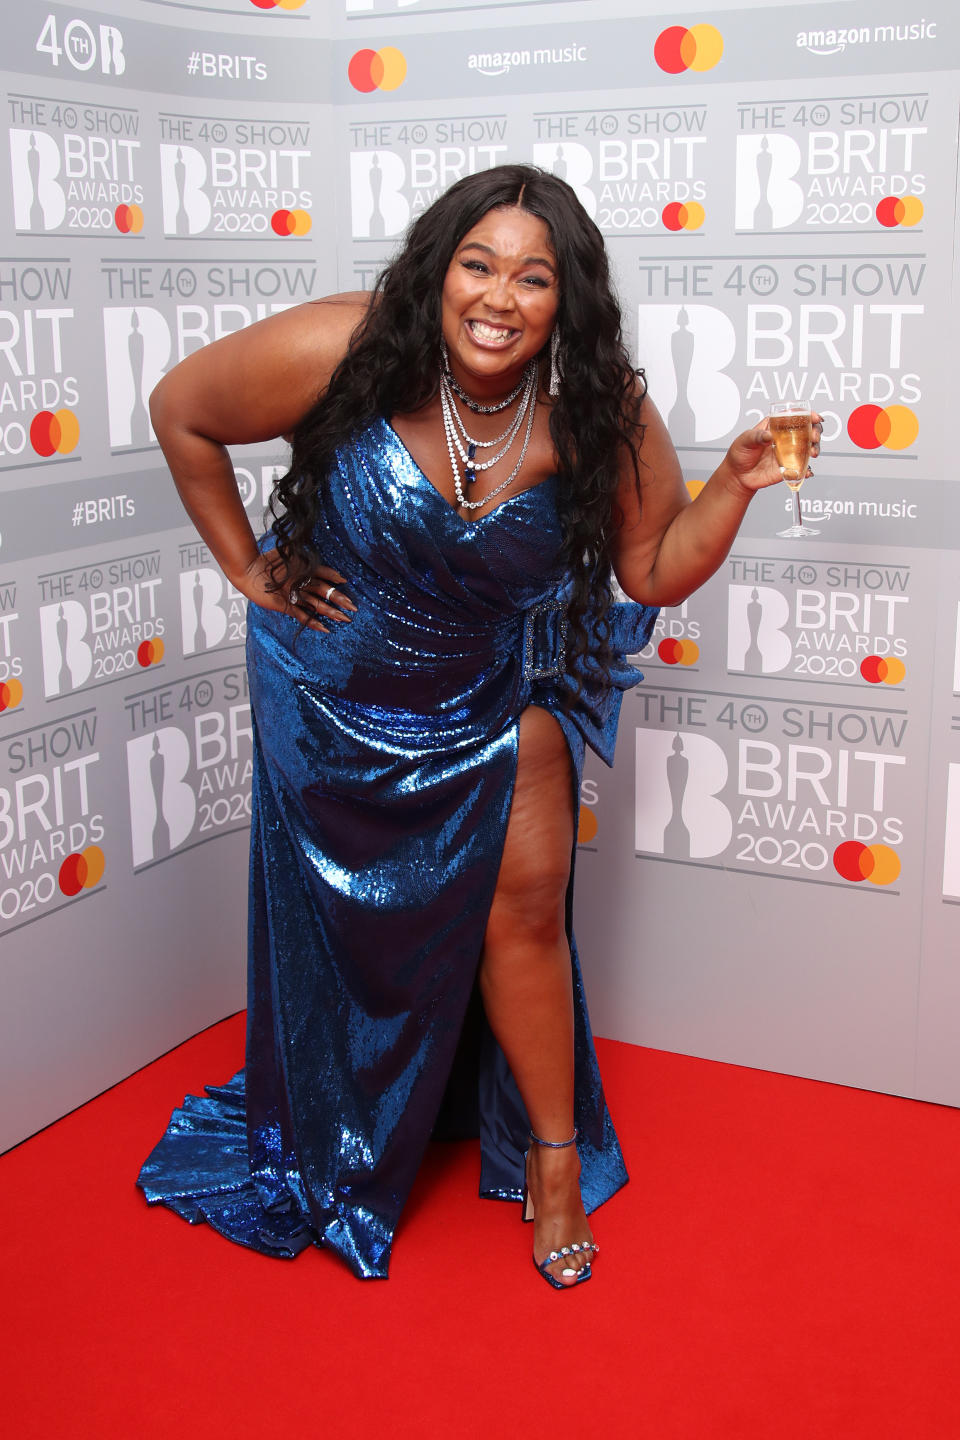 LONDON, ENGLAND - FEBRUARY 18: (EDITORIAL USE ONLY) Lizzo poses in the winners rooms at The BRIT Awards 2020 at The O2 Arena on February 18, 2020 in London, England. (Photo by Mike Marsland/WireImage)